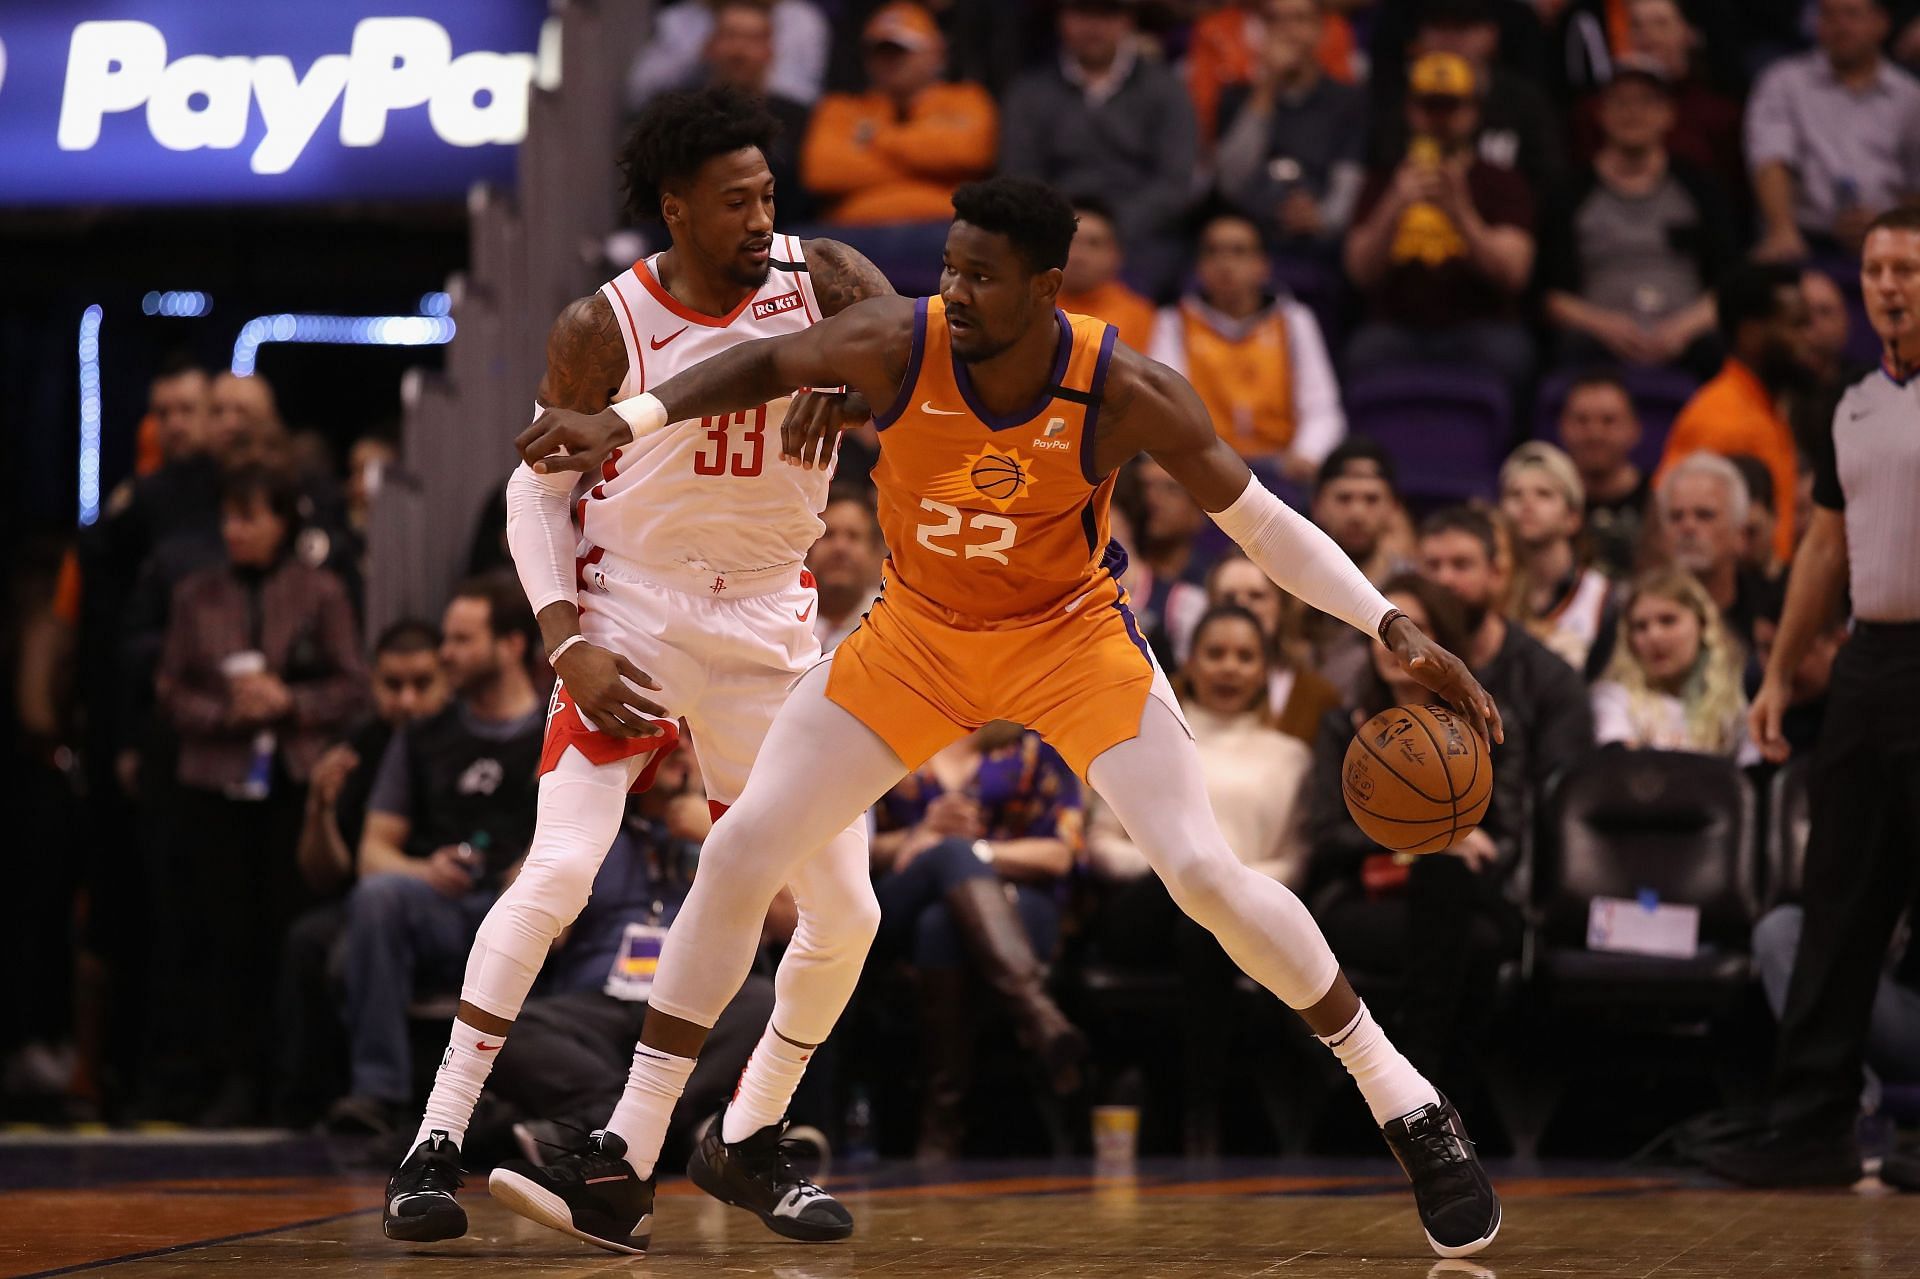 The Houston Rockets and the Phoenix Suns will face off at the Footprint Center on Thursday